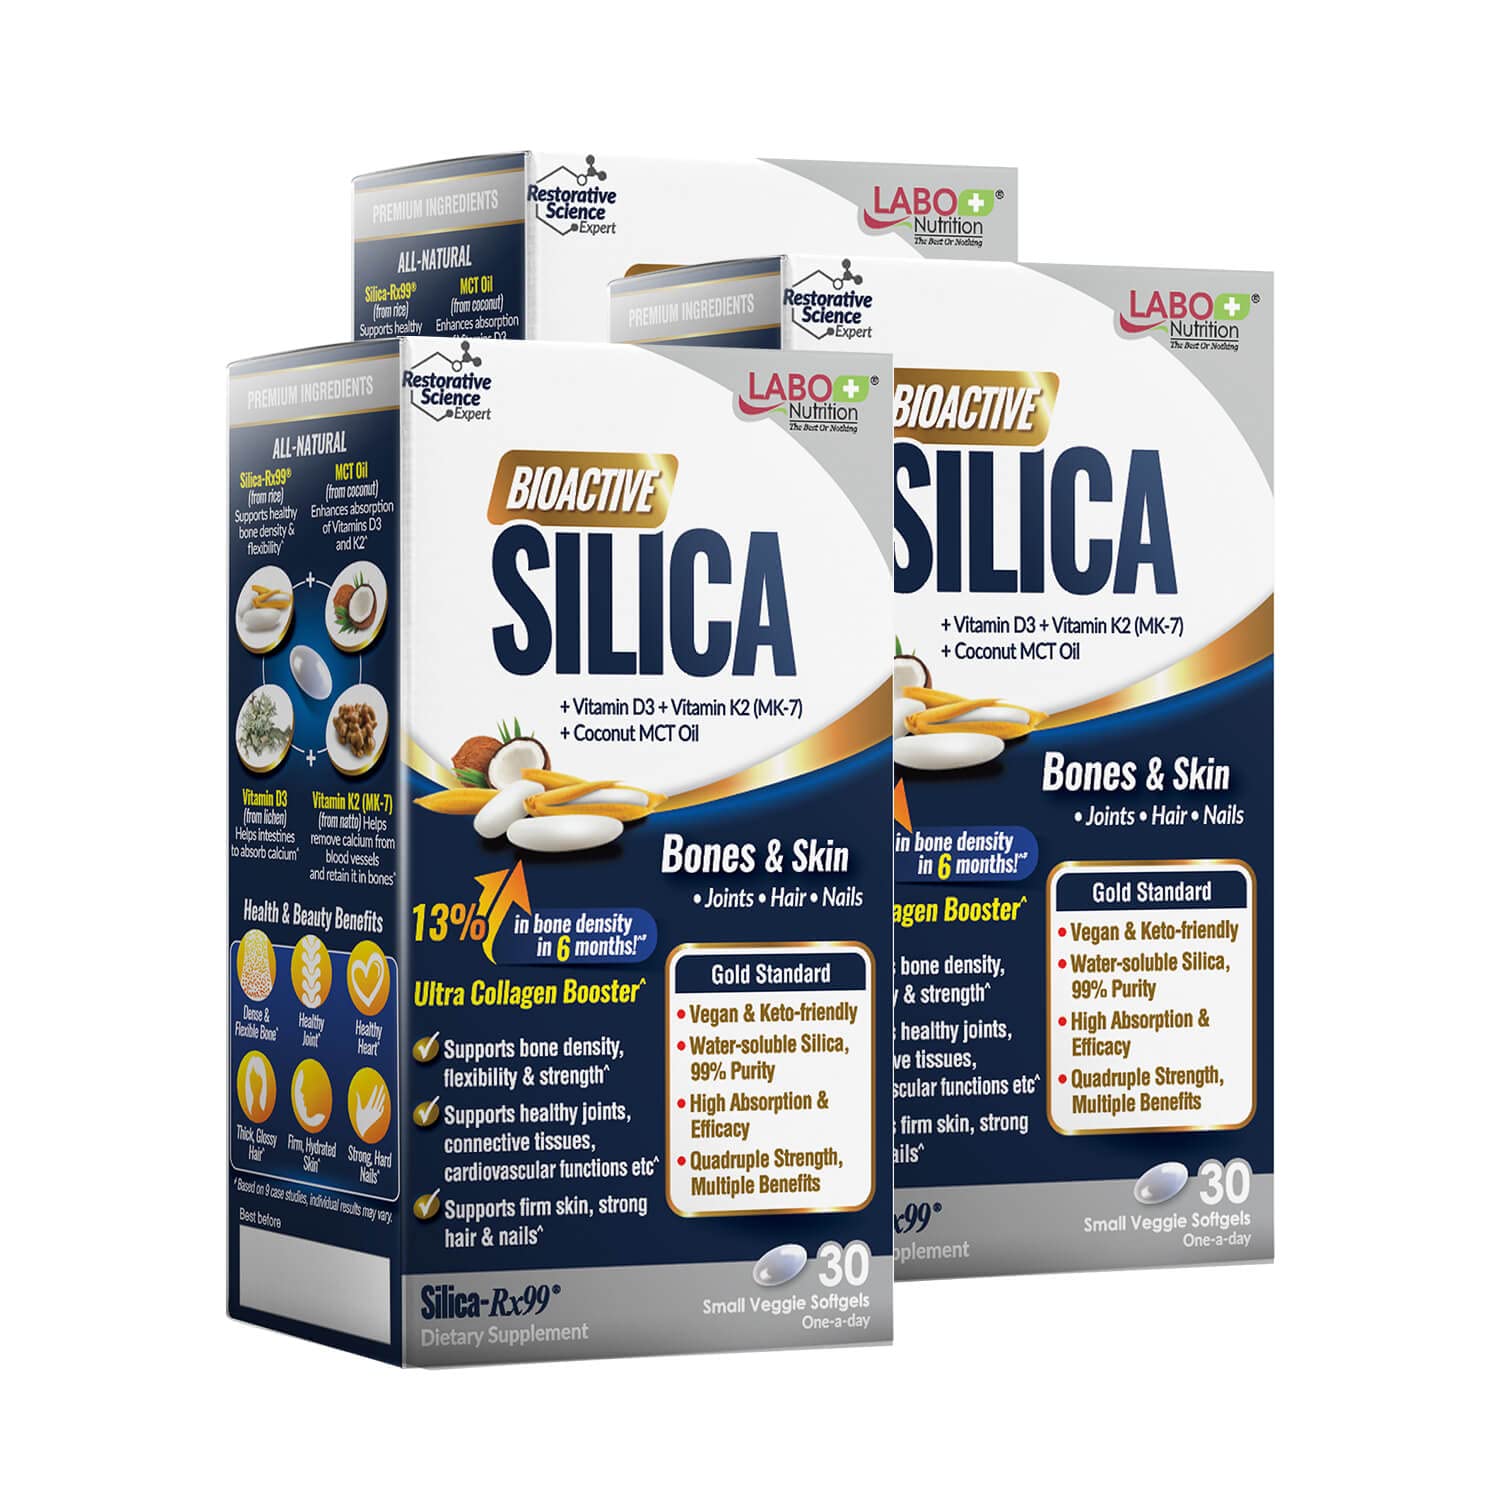 Silica Benefits for Skin & Beauty